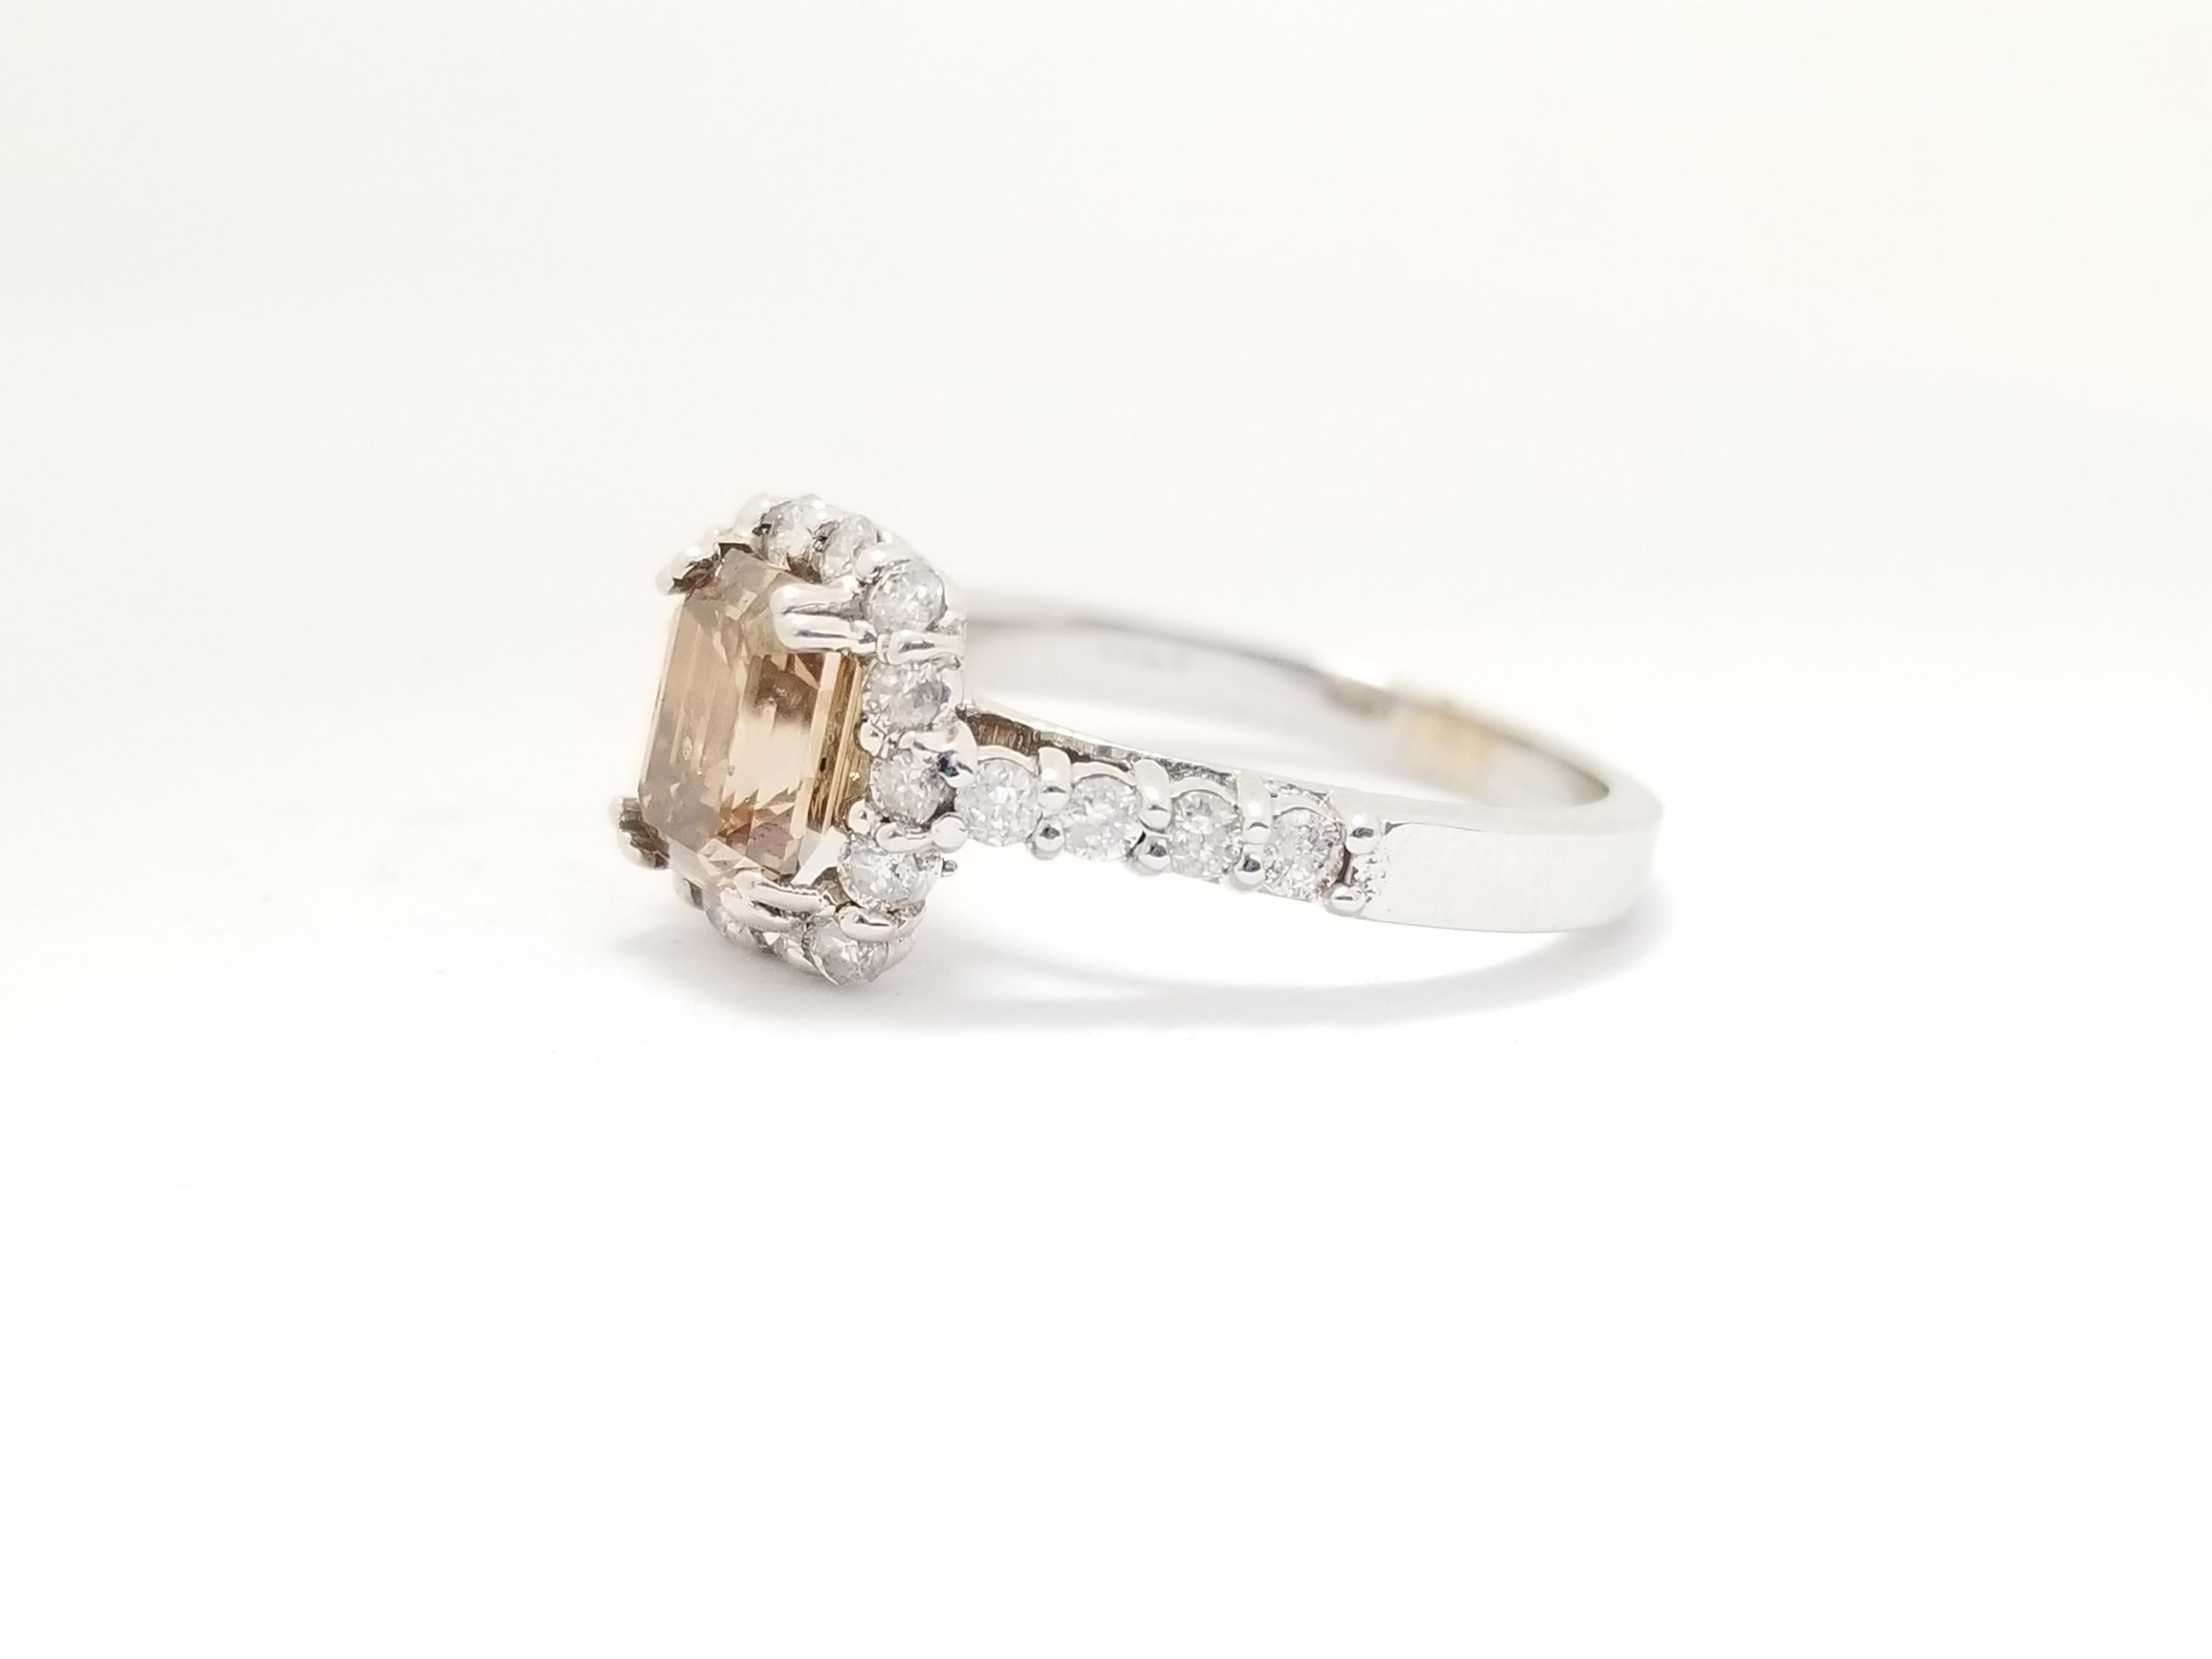 GIA 1.33 Carat Emerald Cut Fancy Yellow Brown Diamond Ring White Gold 14K In New Condition For Sale In Great Neck, NY